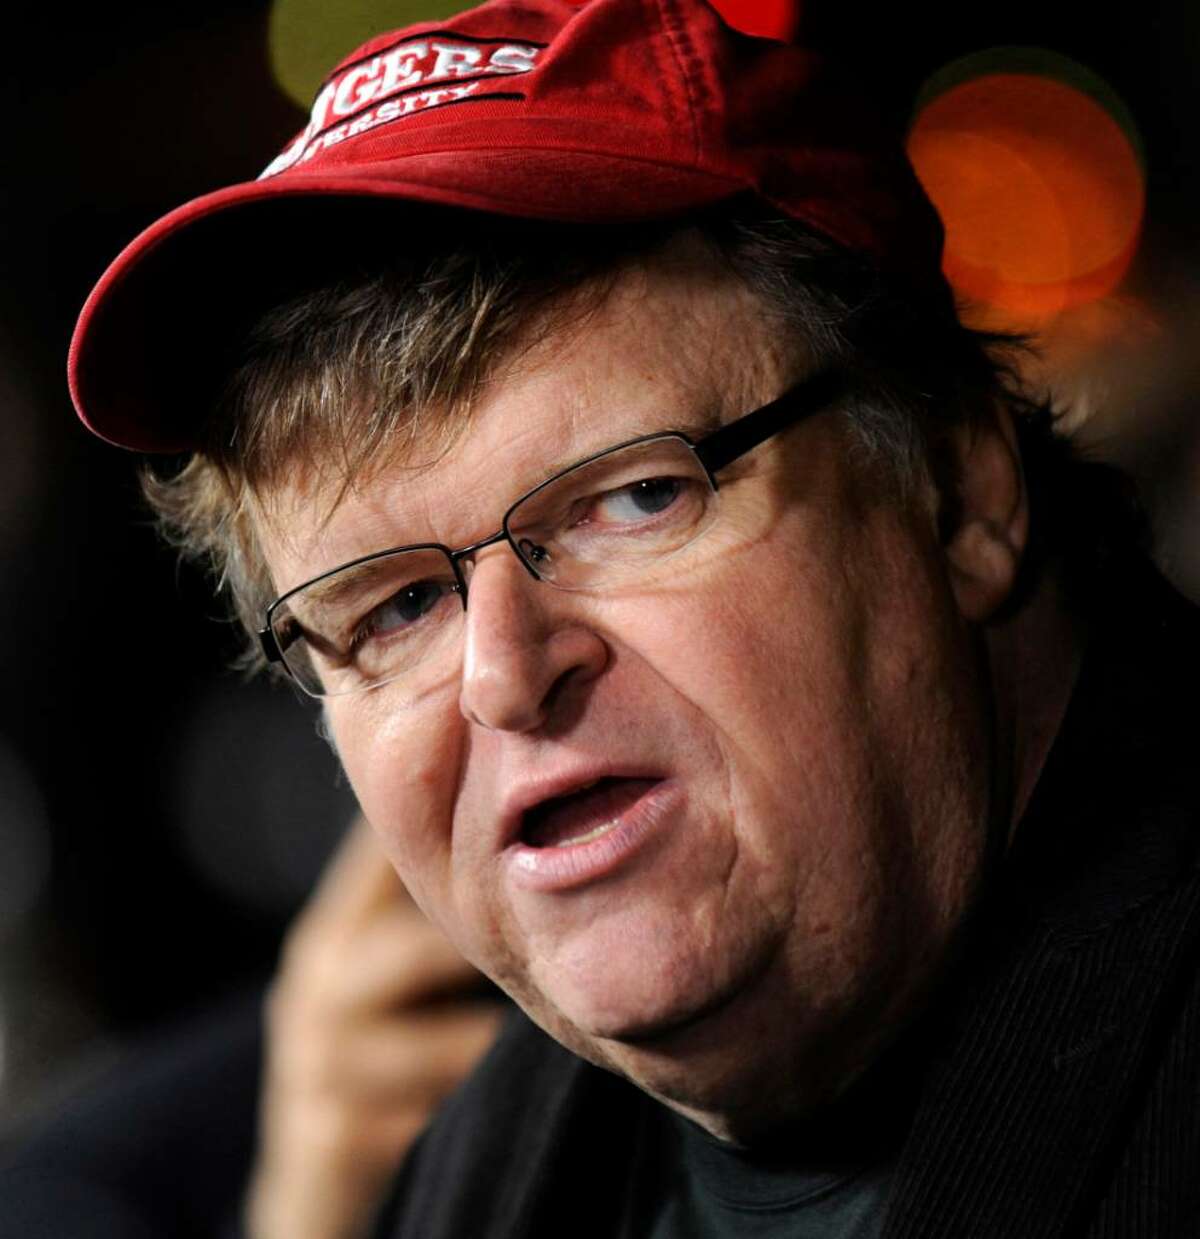 FILE - This Sept. 15, 2009, file photo shows filmmaker Michael Moore at the Academy of Motion Picture Arts and Sciences in Beverly Hills, Calif. On Thursday, Dec. 17, 2009, Moore called for a boycott of the state of Connecticut because of his opposition to Sen. Joe Lieberman's stand on universal healthcare. (AP Photo/Chris Pizzello, File)